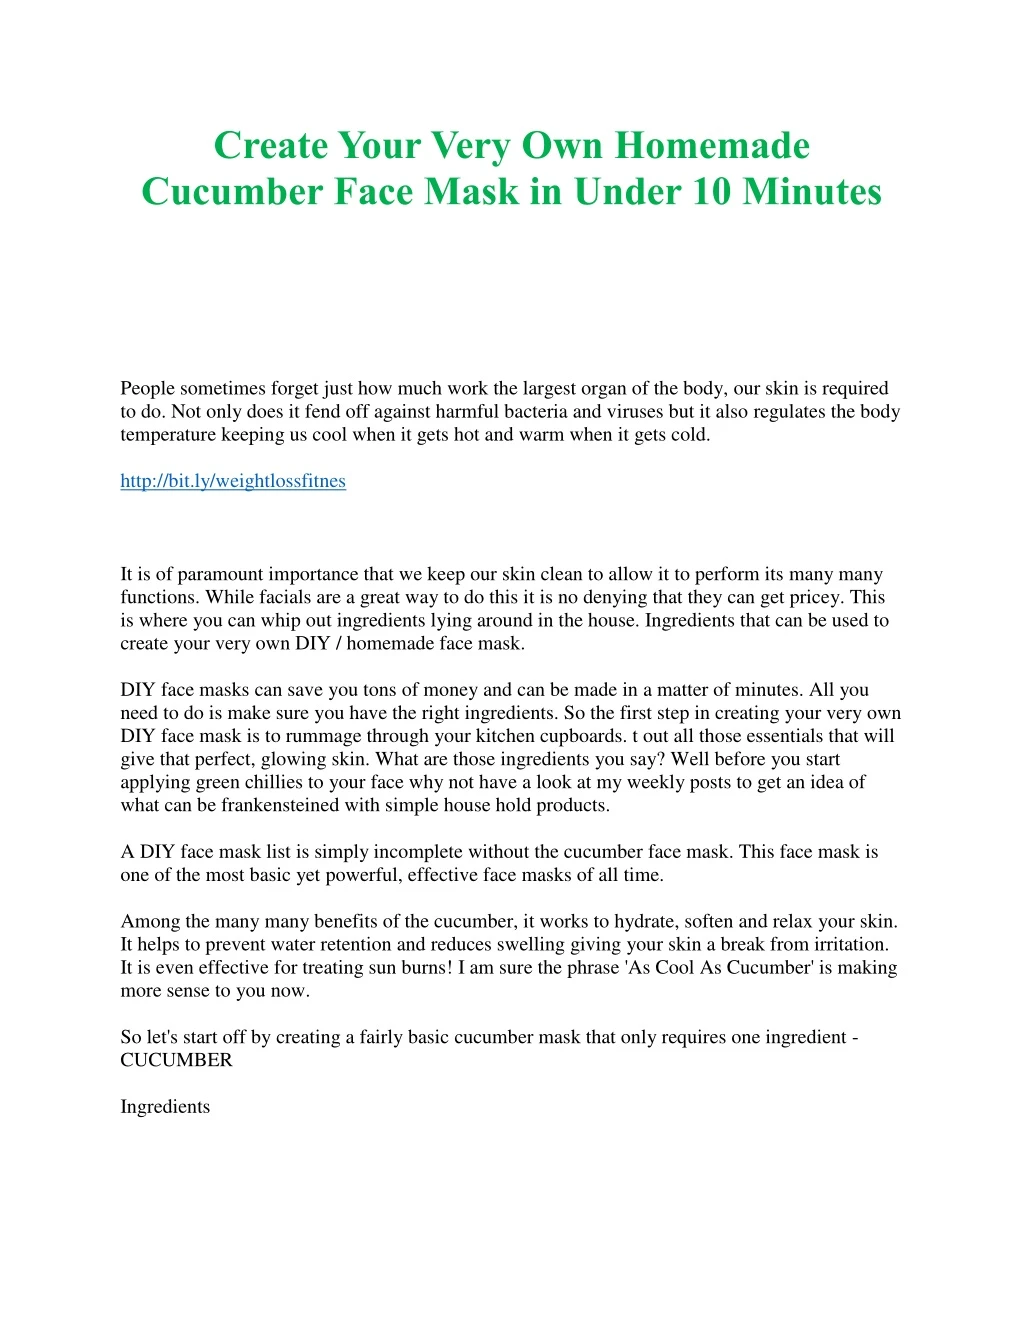 create your very own homemade cucumber face mask